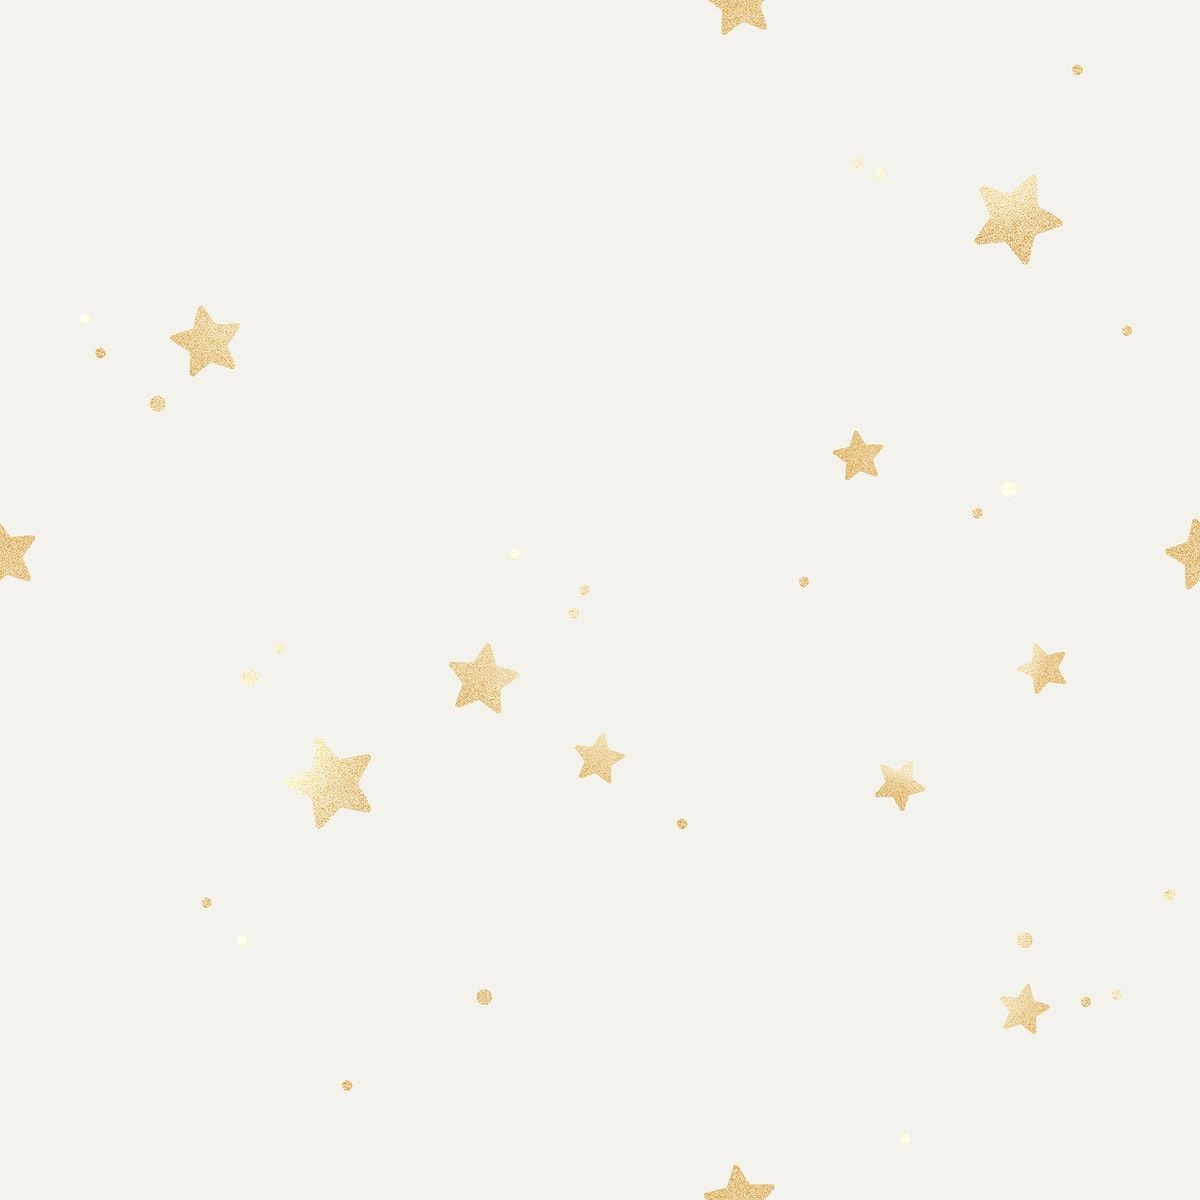 Gold Star Seamless Pattern On A Beige Background Image By